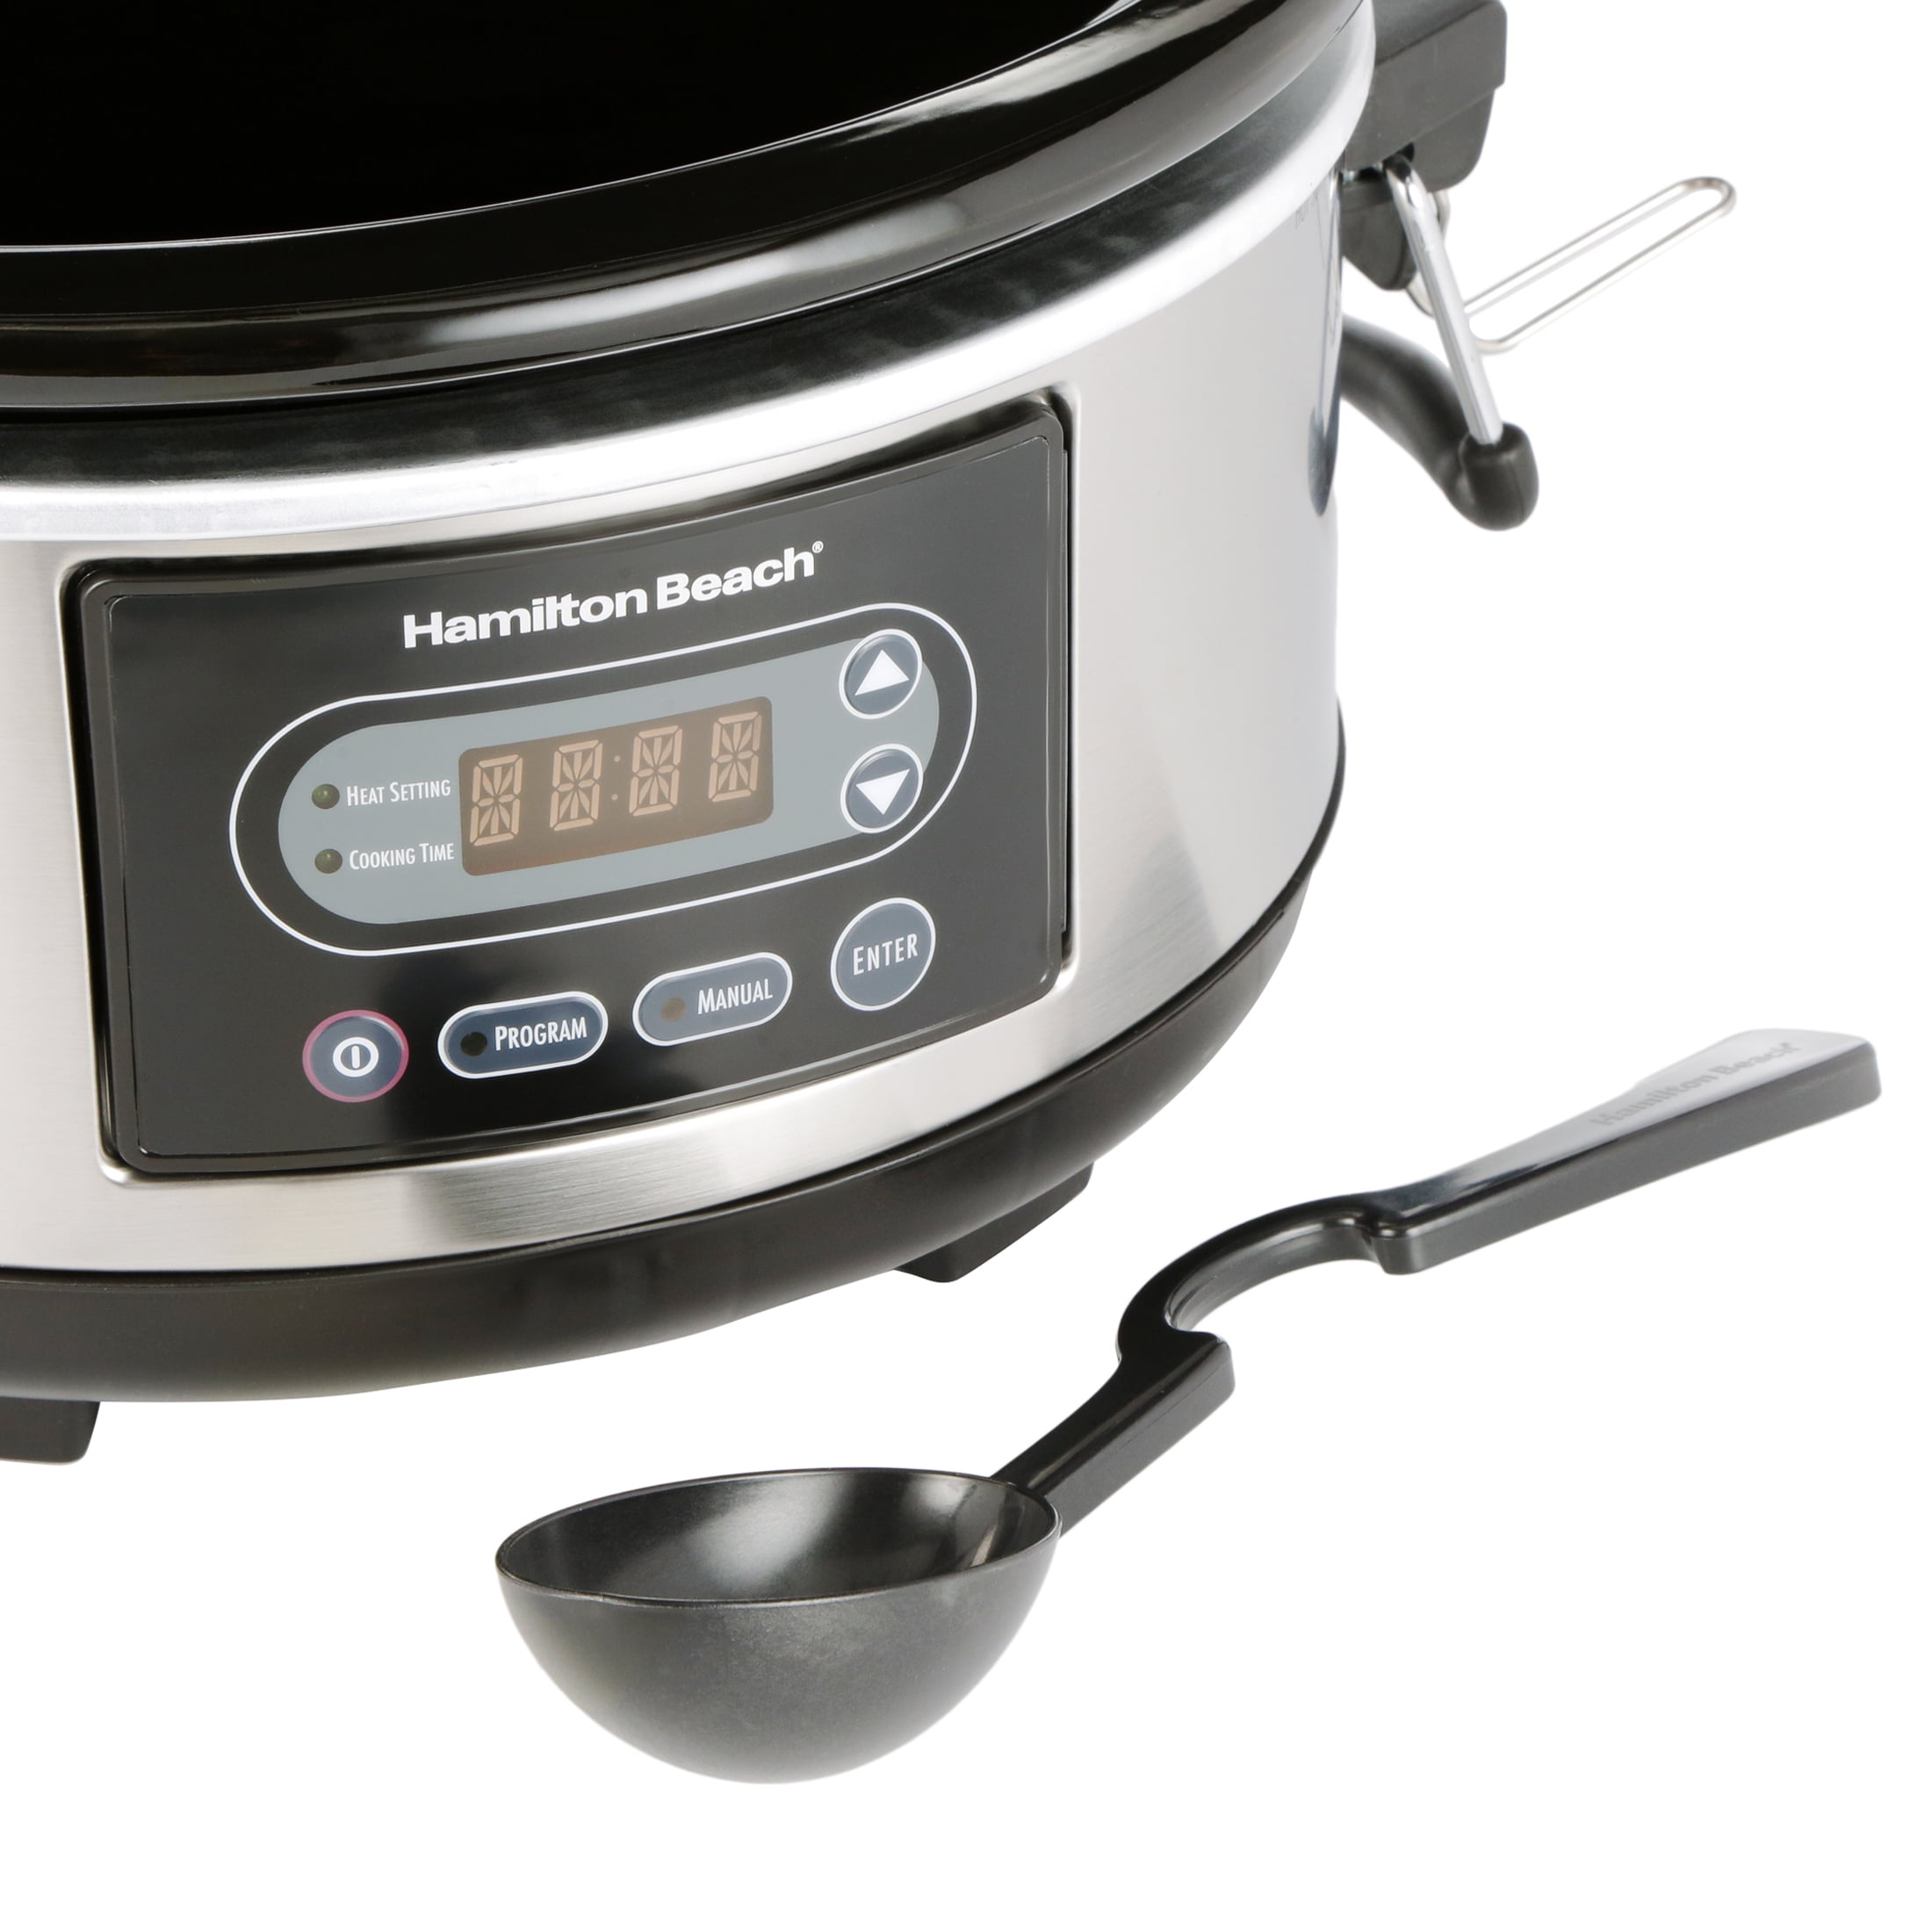 Hamilton Beach Programmable Slow Cooker - Shop Cookers & Roasters at H-E-B